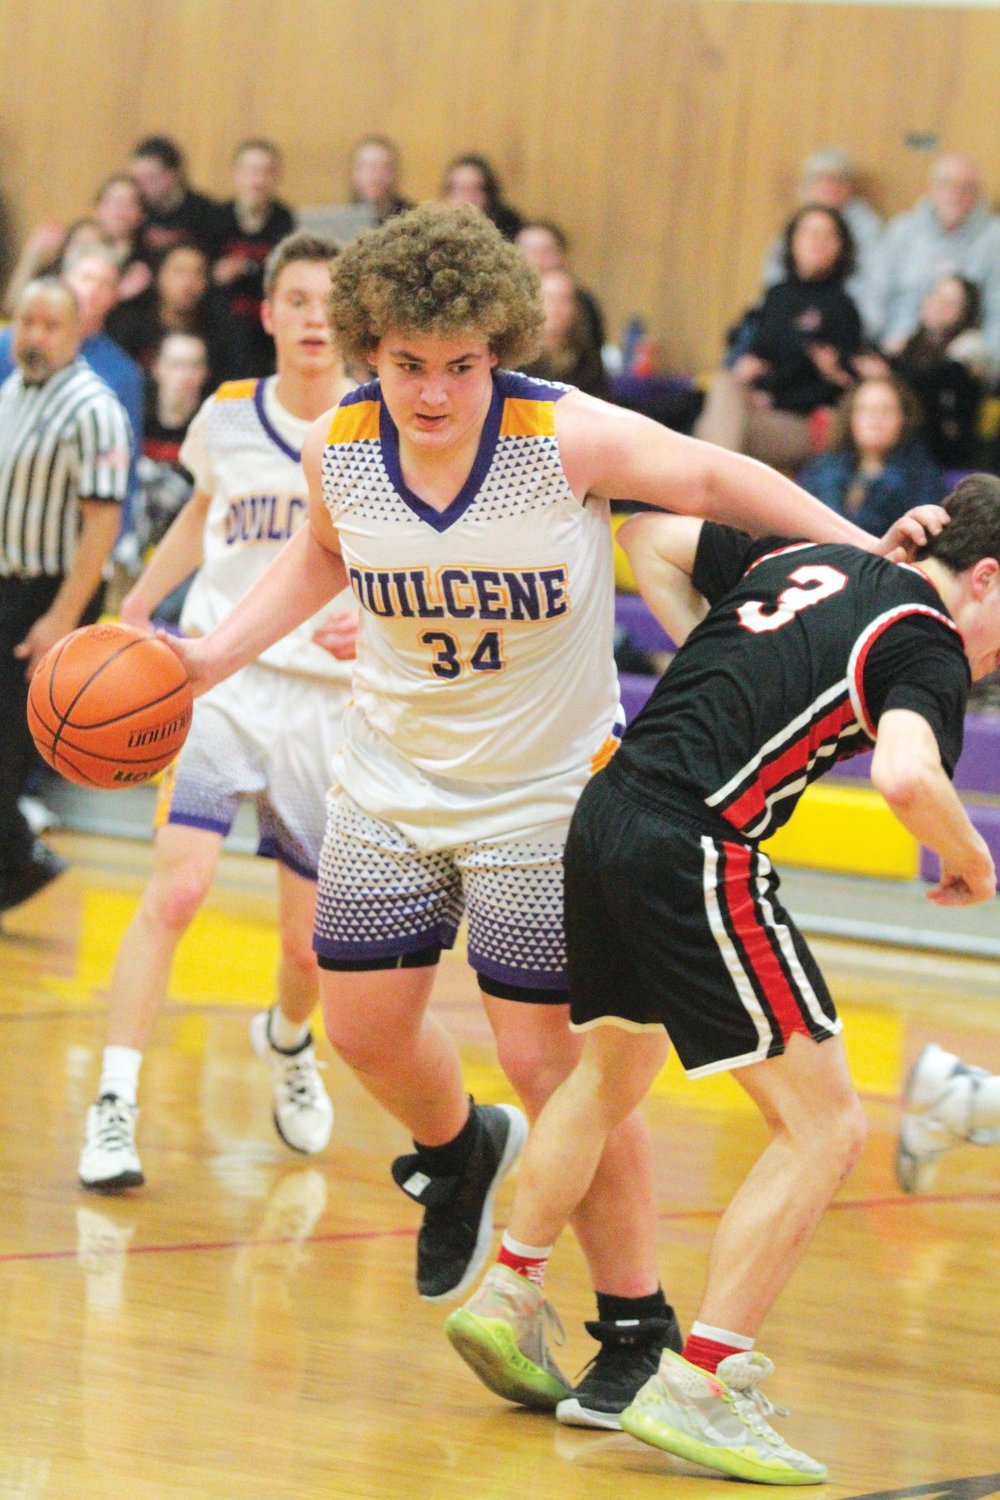 Taylor Boling creates some room in the lane by adjusting the position of Silas Stenerson of Crosspoint Academy during the matchup late last week in Quilcene.